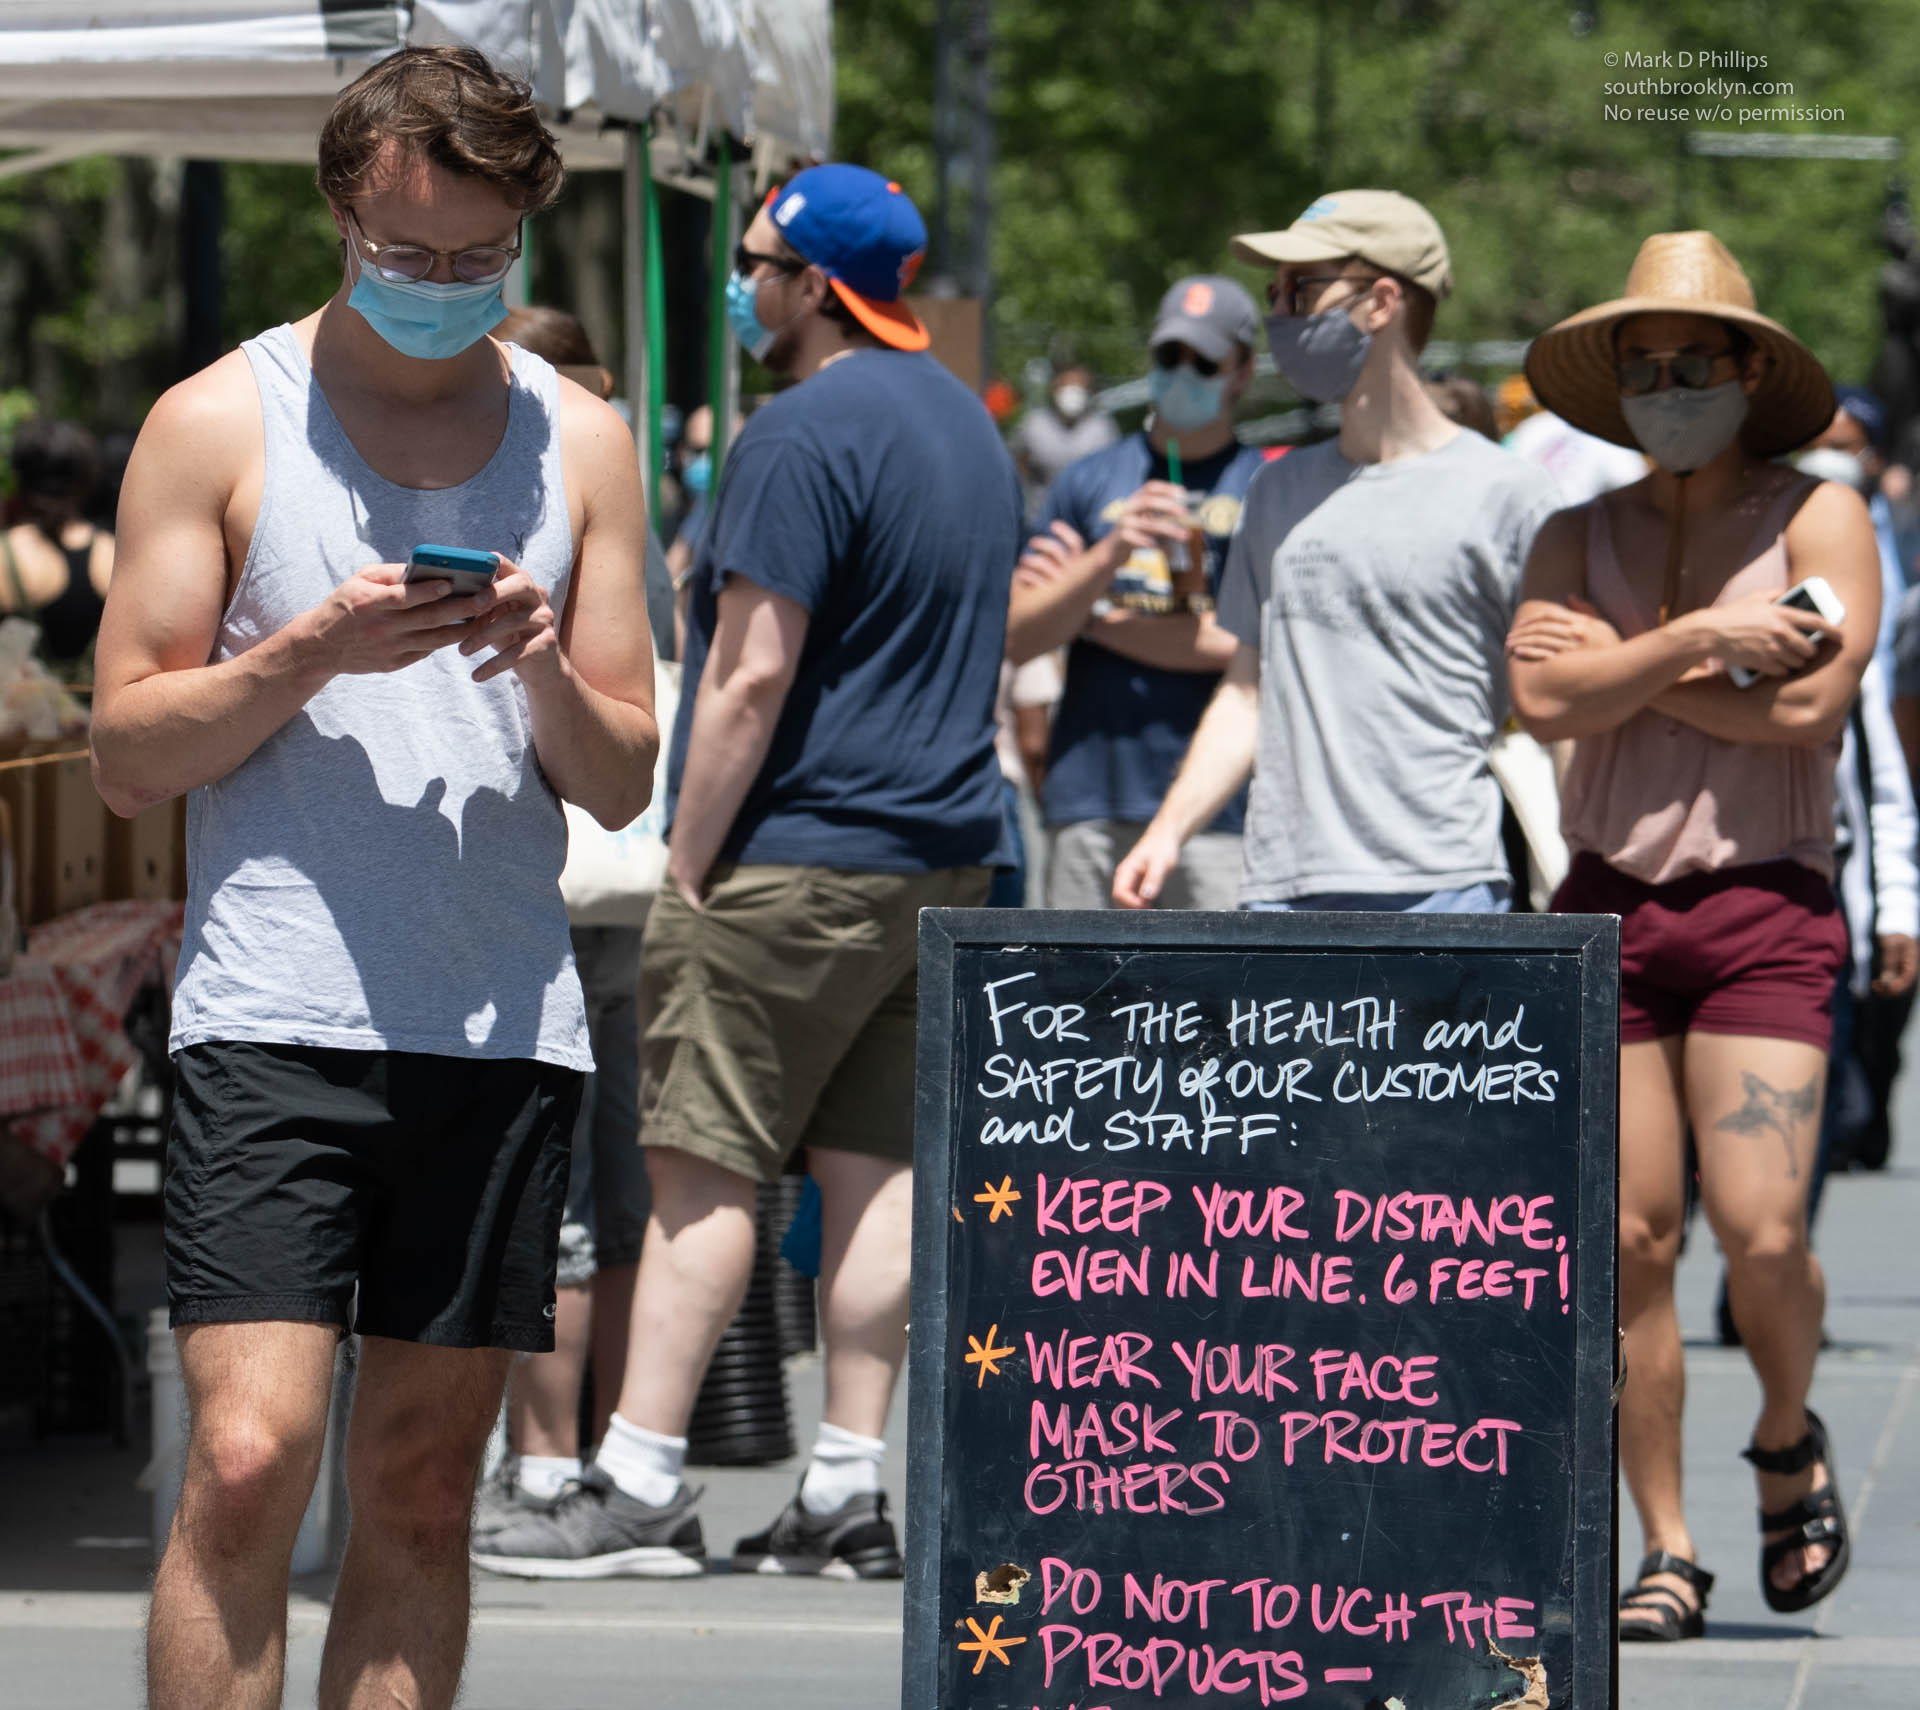 New York City on May 30, 2020, during the Covid-19 pandemic, shoppers at the Brooklyn Heights Farmers Market are greeted with a new reality and new rules. ©Mark D Phillips